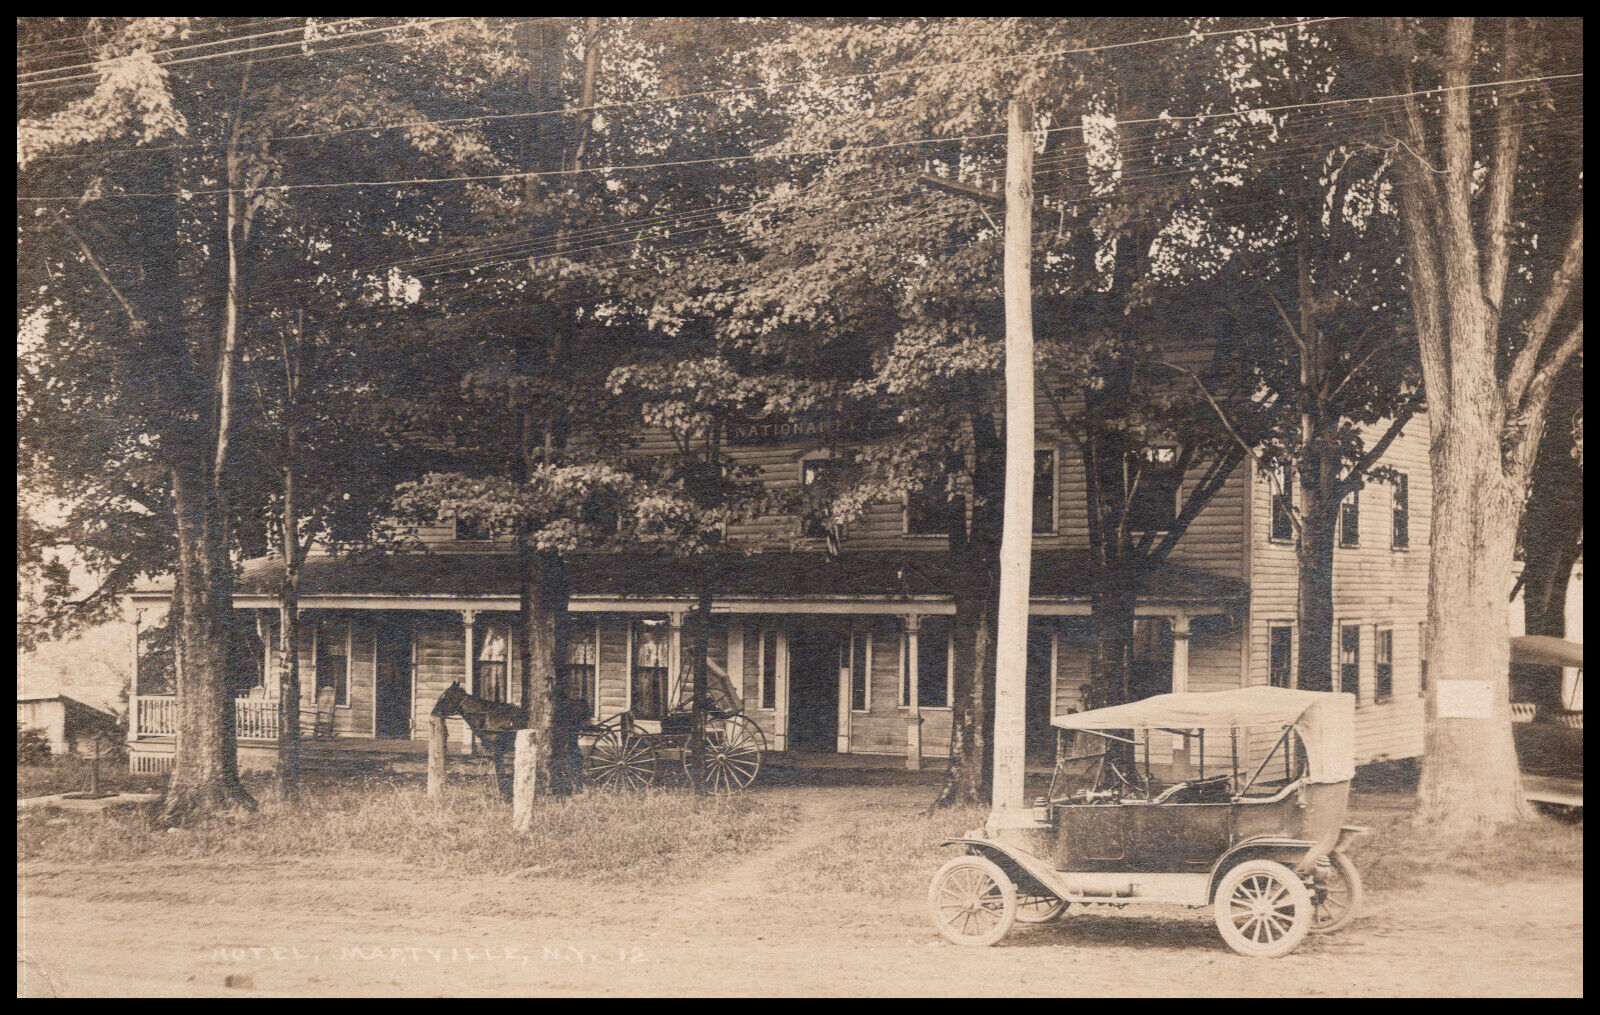 Martville, New York, Sterling, NY, Hotel, Horse/Cart, Early Autos, Postcard RPPC